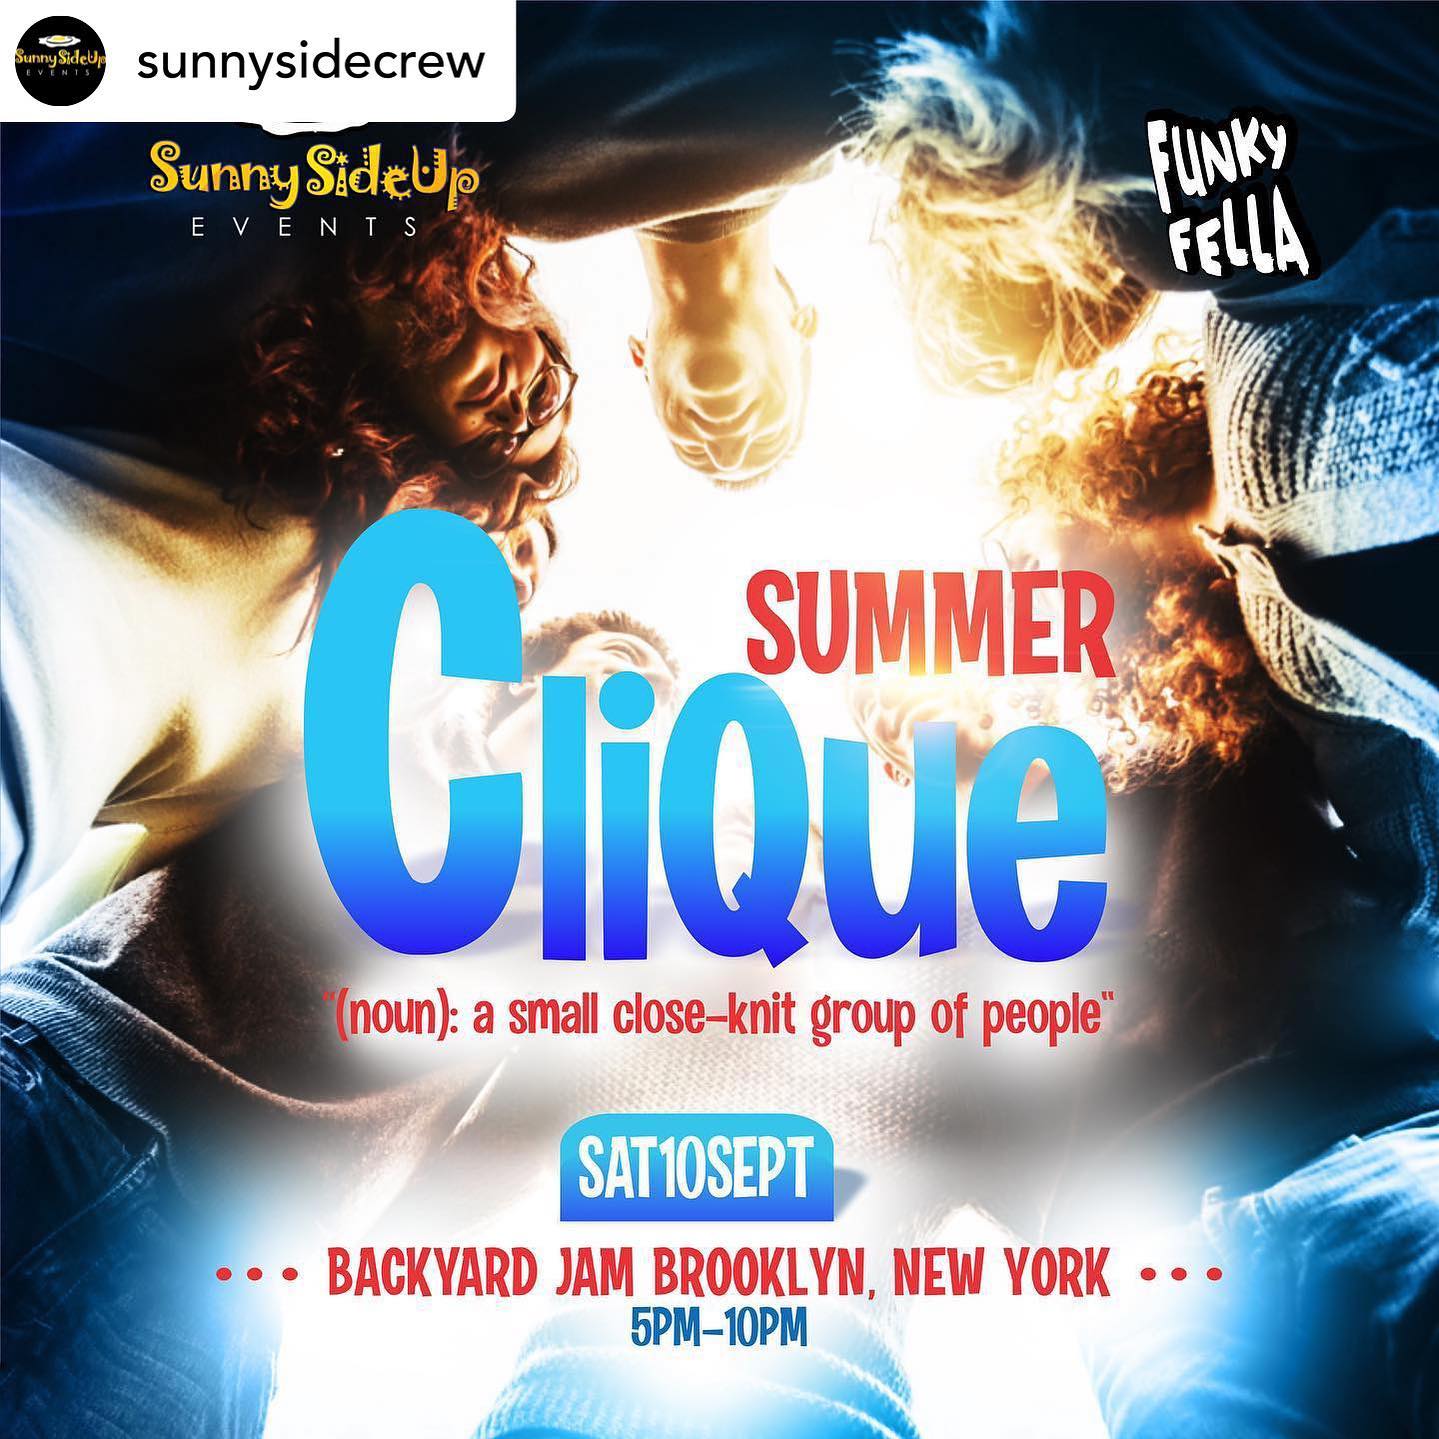 • @sunnysidecrew The Best way to wrap up the Summer is with your CLIQUE!! 🕺🏽️

Brooklyn this is the event where all CLIQUES become one CLIQUE for the SUMMER 😎

Gather your team and catch us on Saturday 10th September, 5pm - 10pm. Get your tickets today via www.sunnysideuptt.com or click the link in our bio. 

Presented by Sunny Side Up Events x Funky Fella!